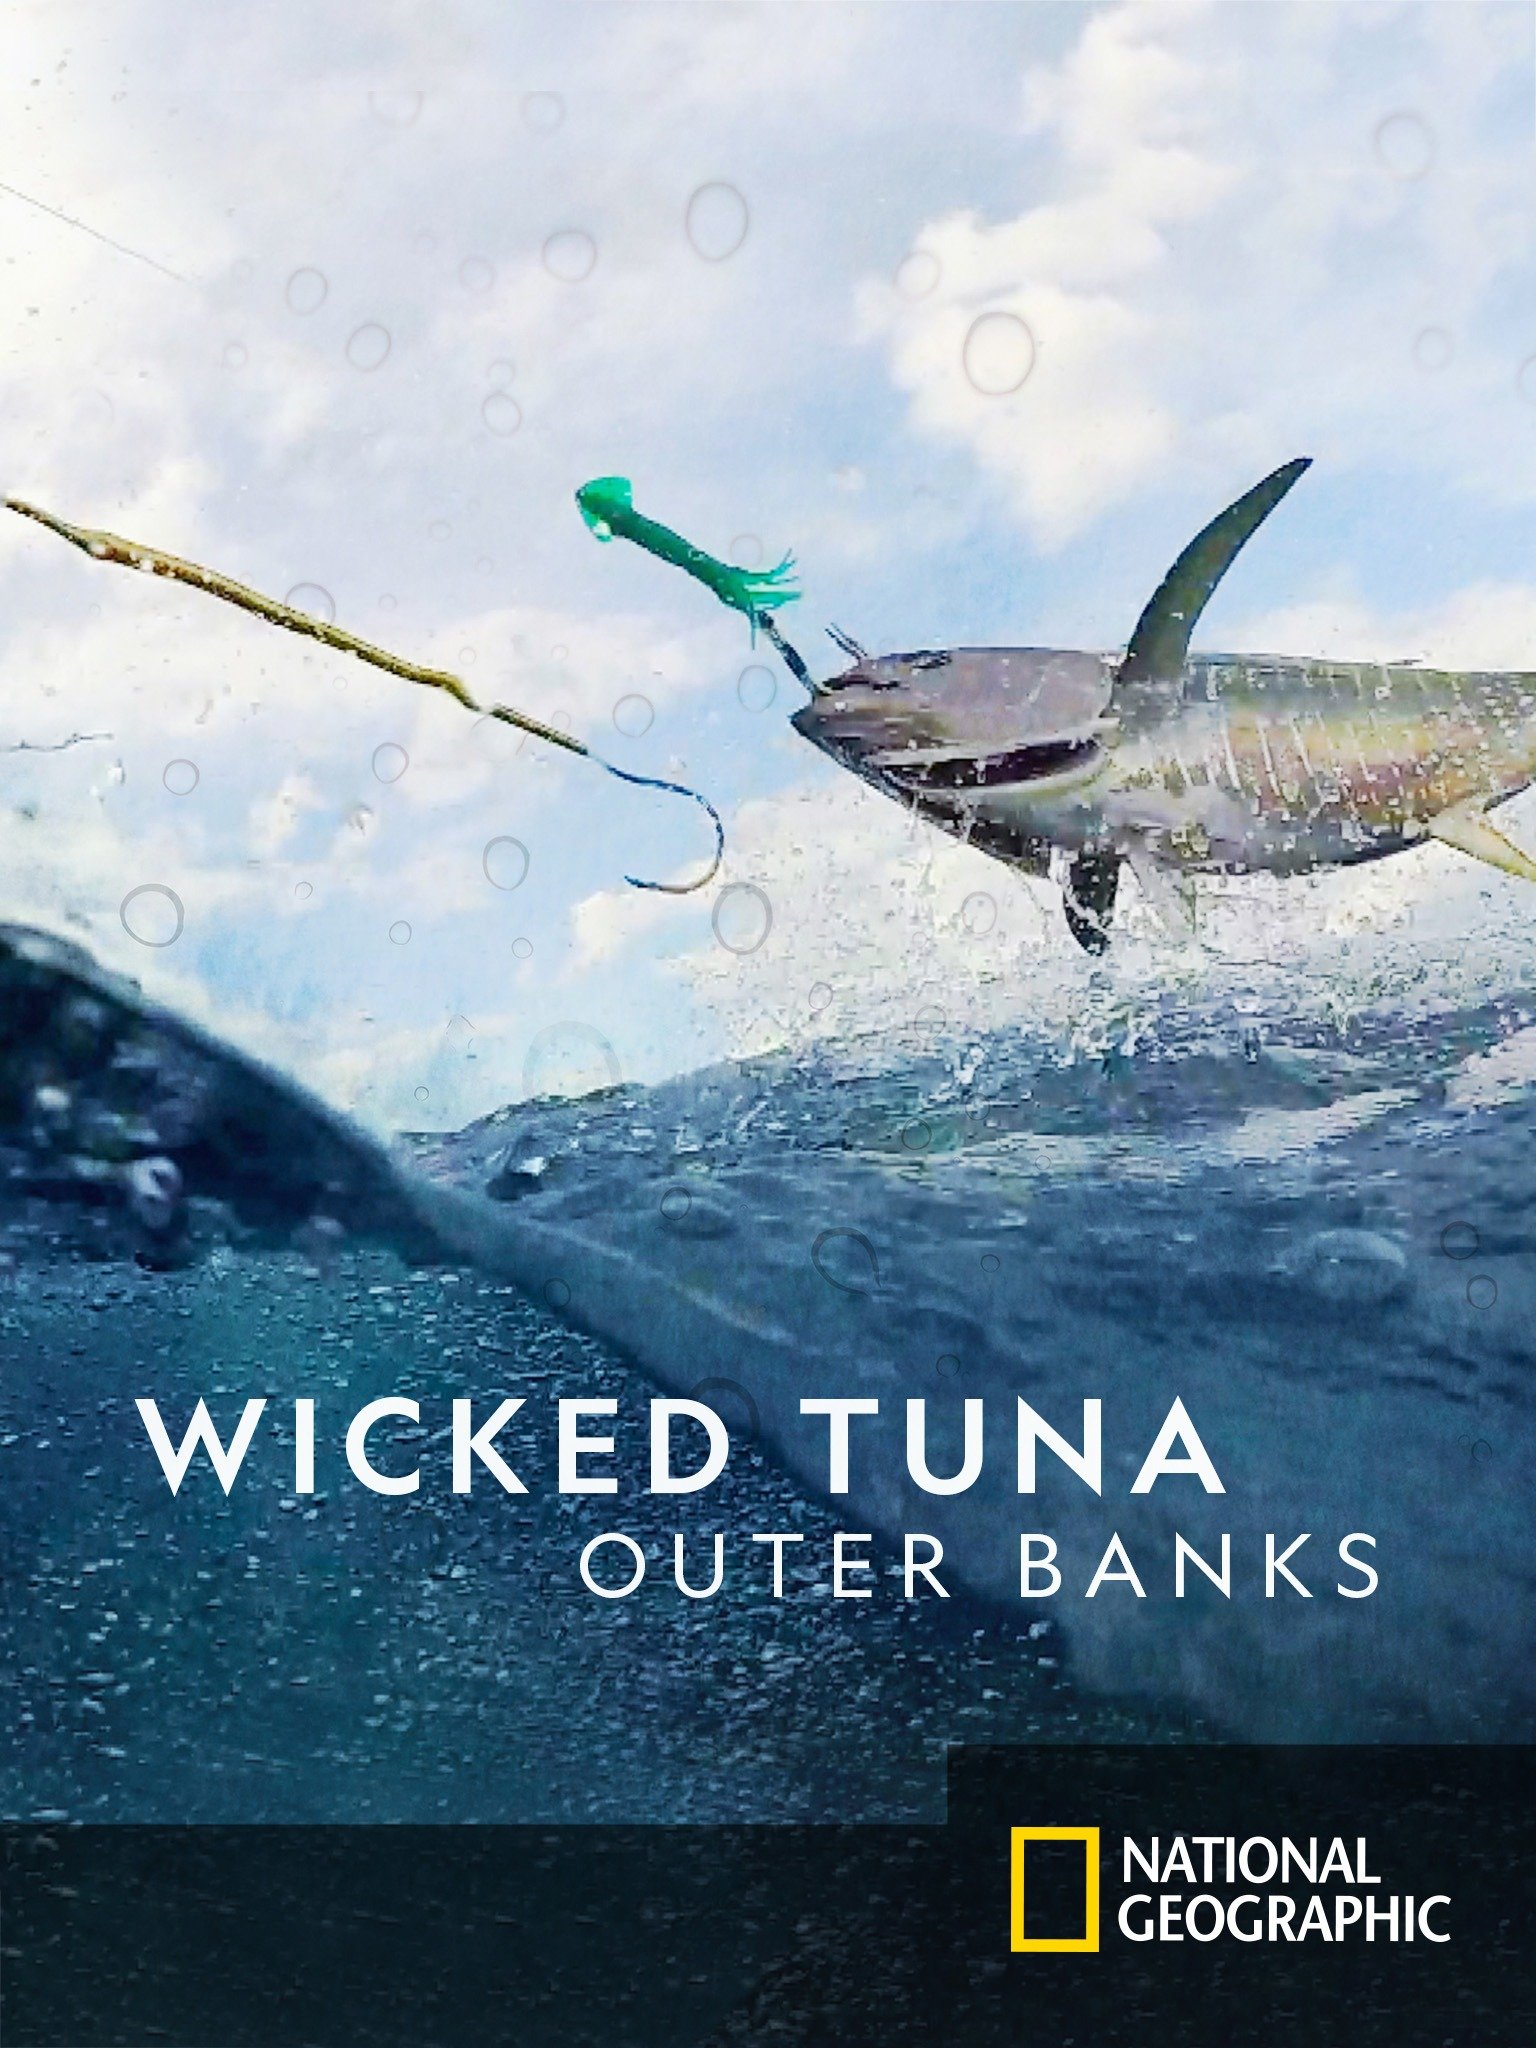 Wicked Tuna Outer Banks Rotten Tomatoes